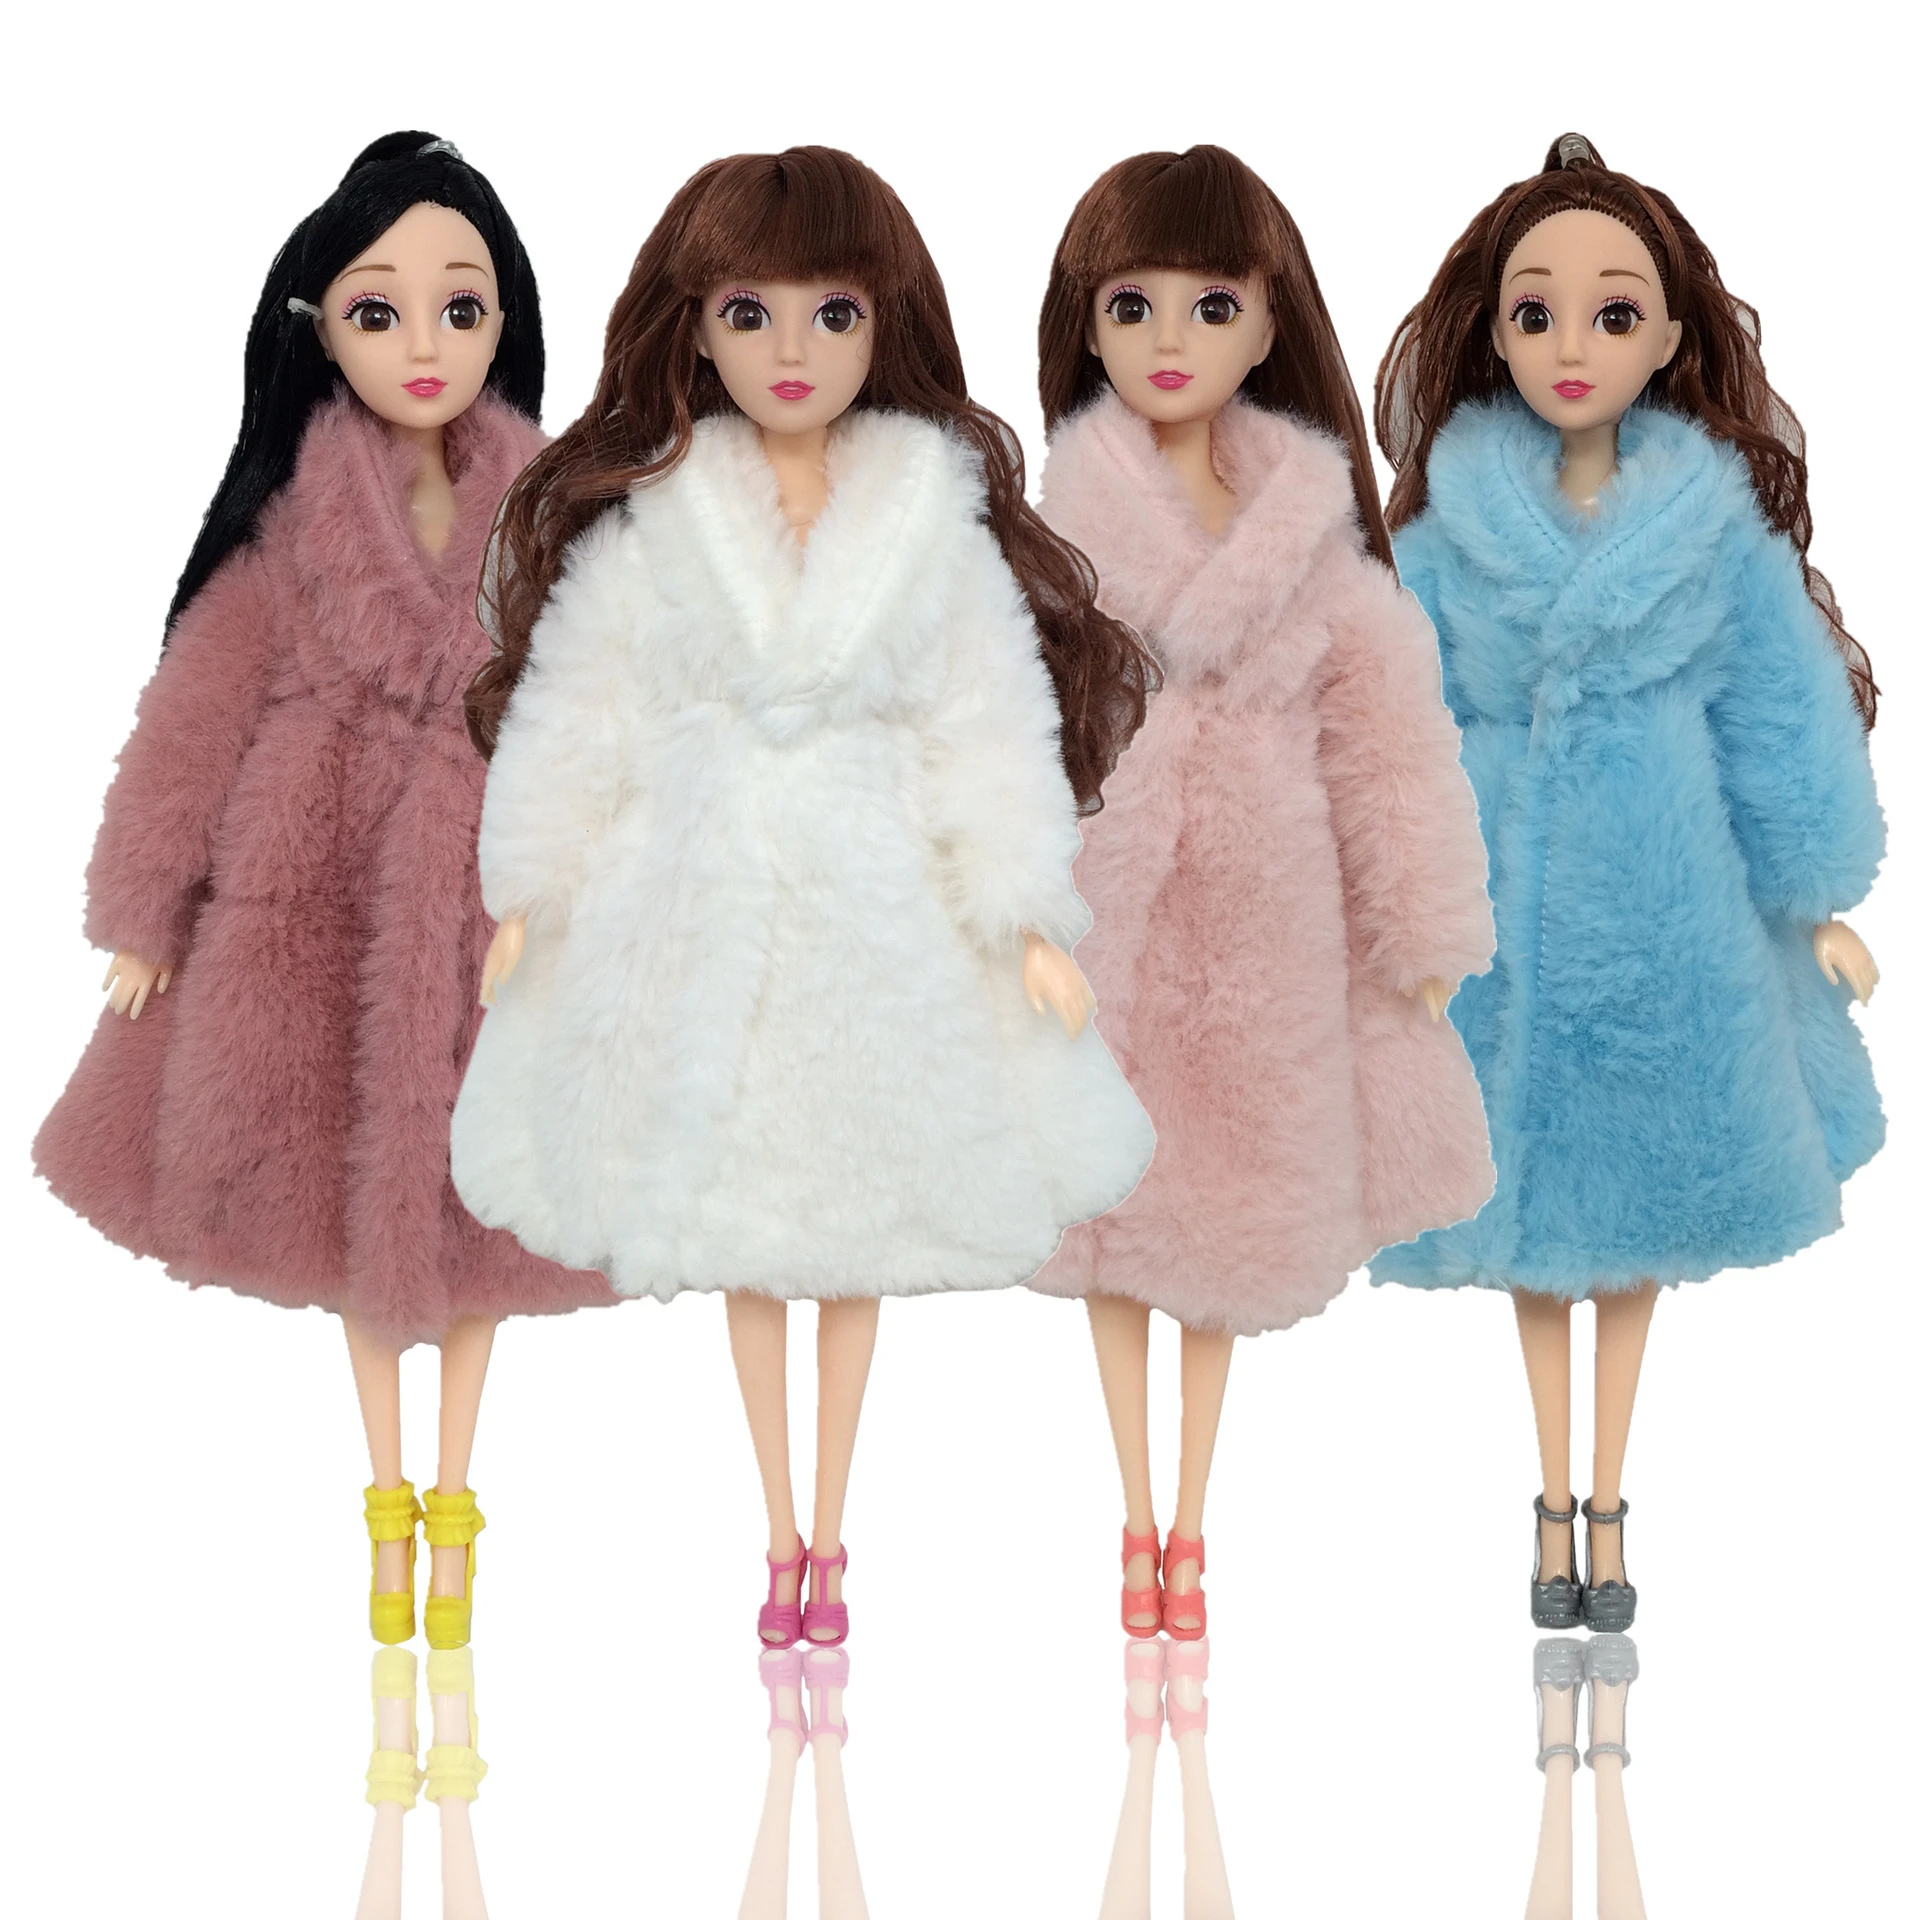 doll with changeable clothes